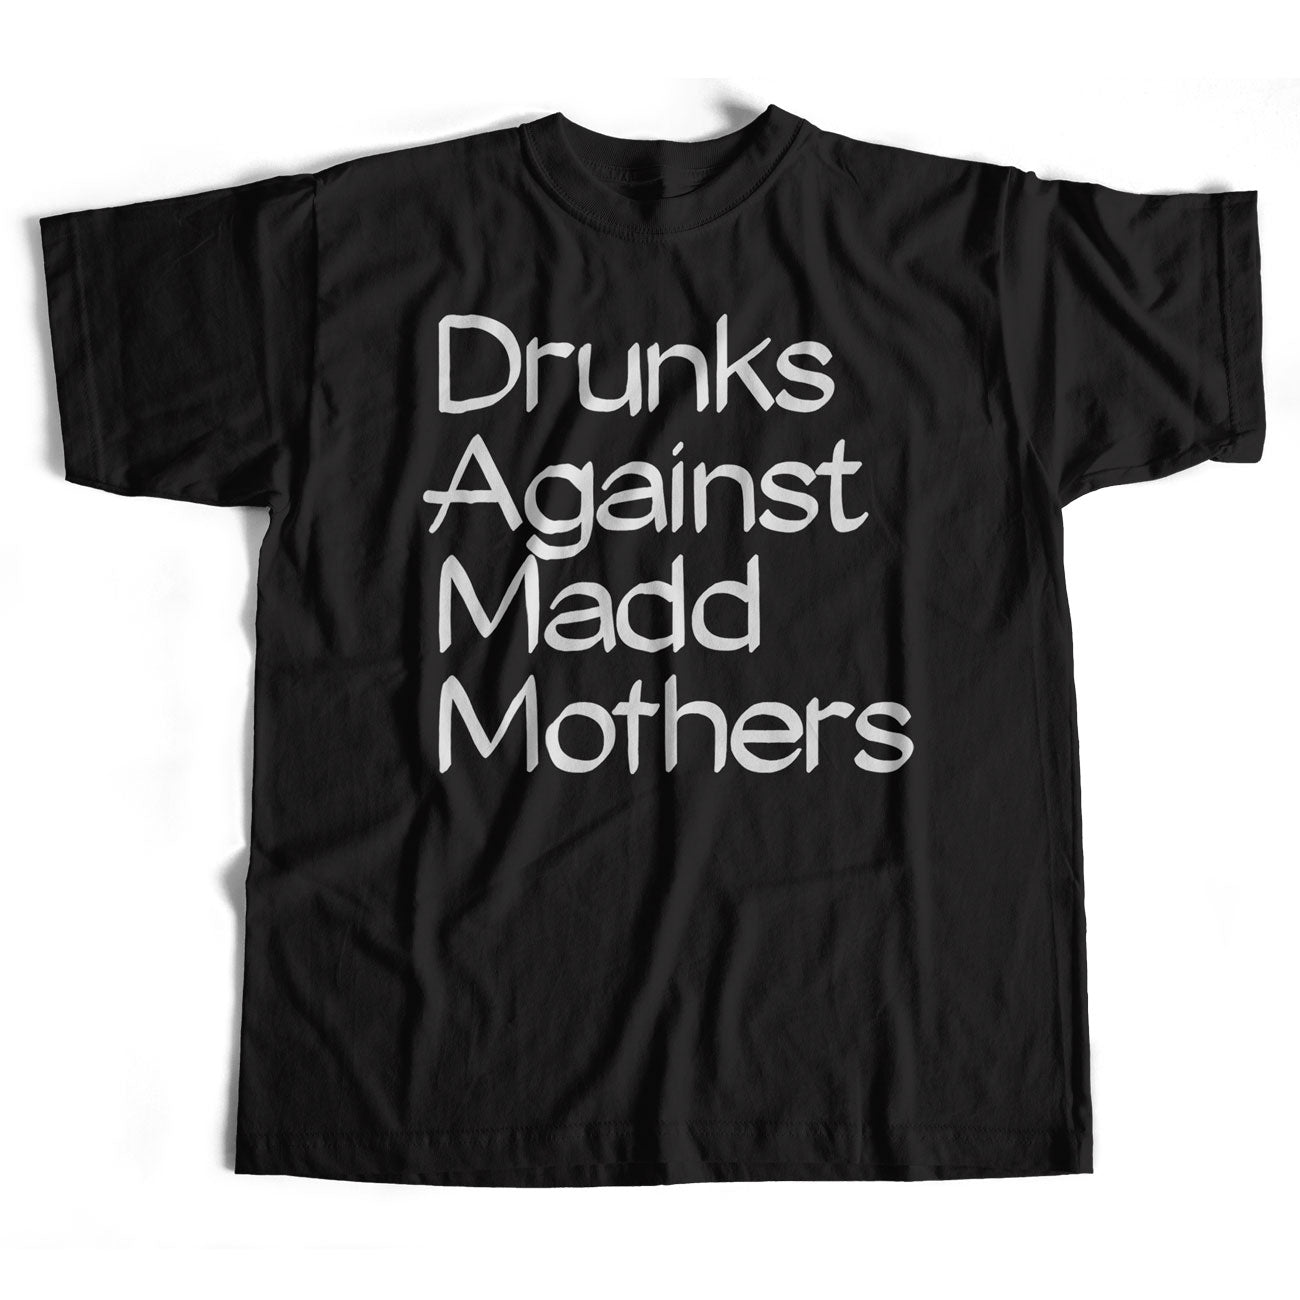 Drunks Against Madd Mothers T Shirt As Worn By James Hetfield